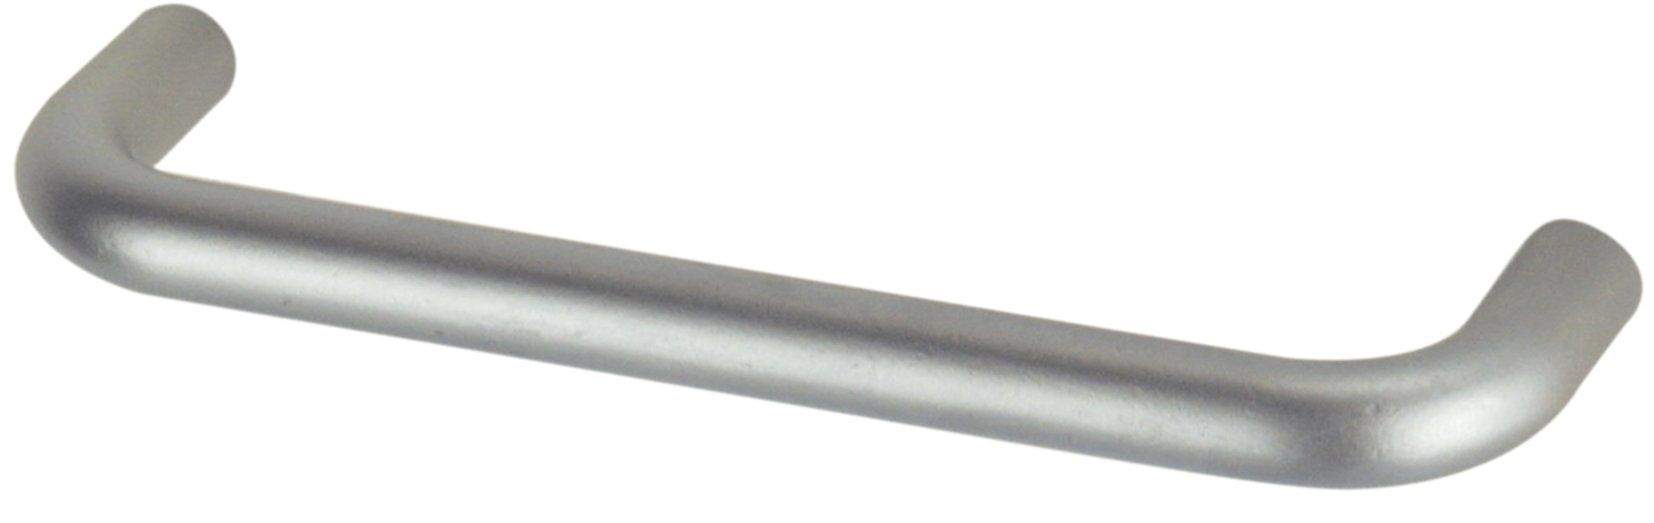 Wire handle with satin chrome-plated steel insert, W.104mm, D.8mm, D.28mm, 96mm pitch, 1 piece with screws.